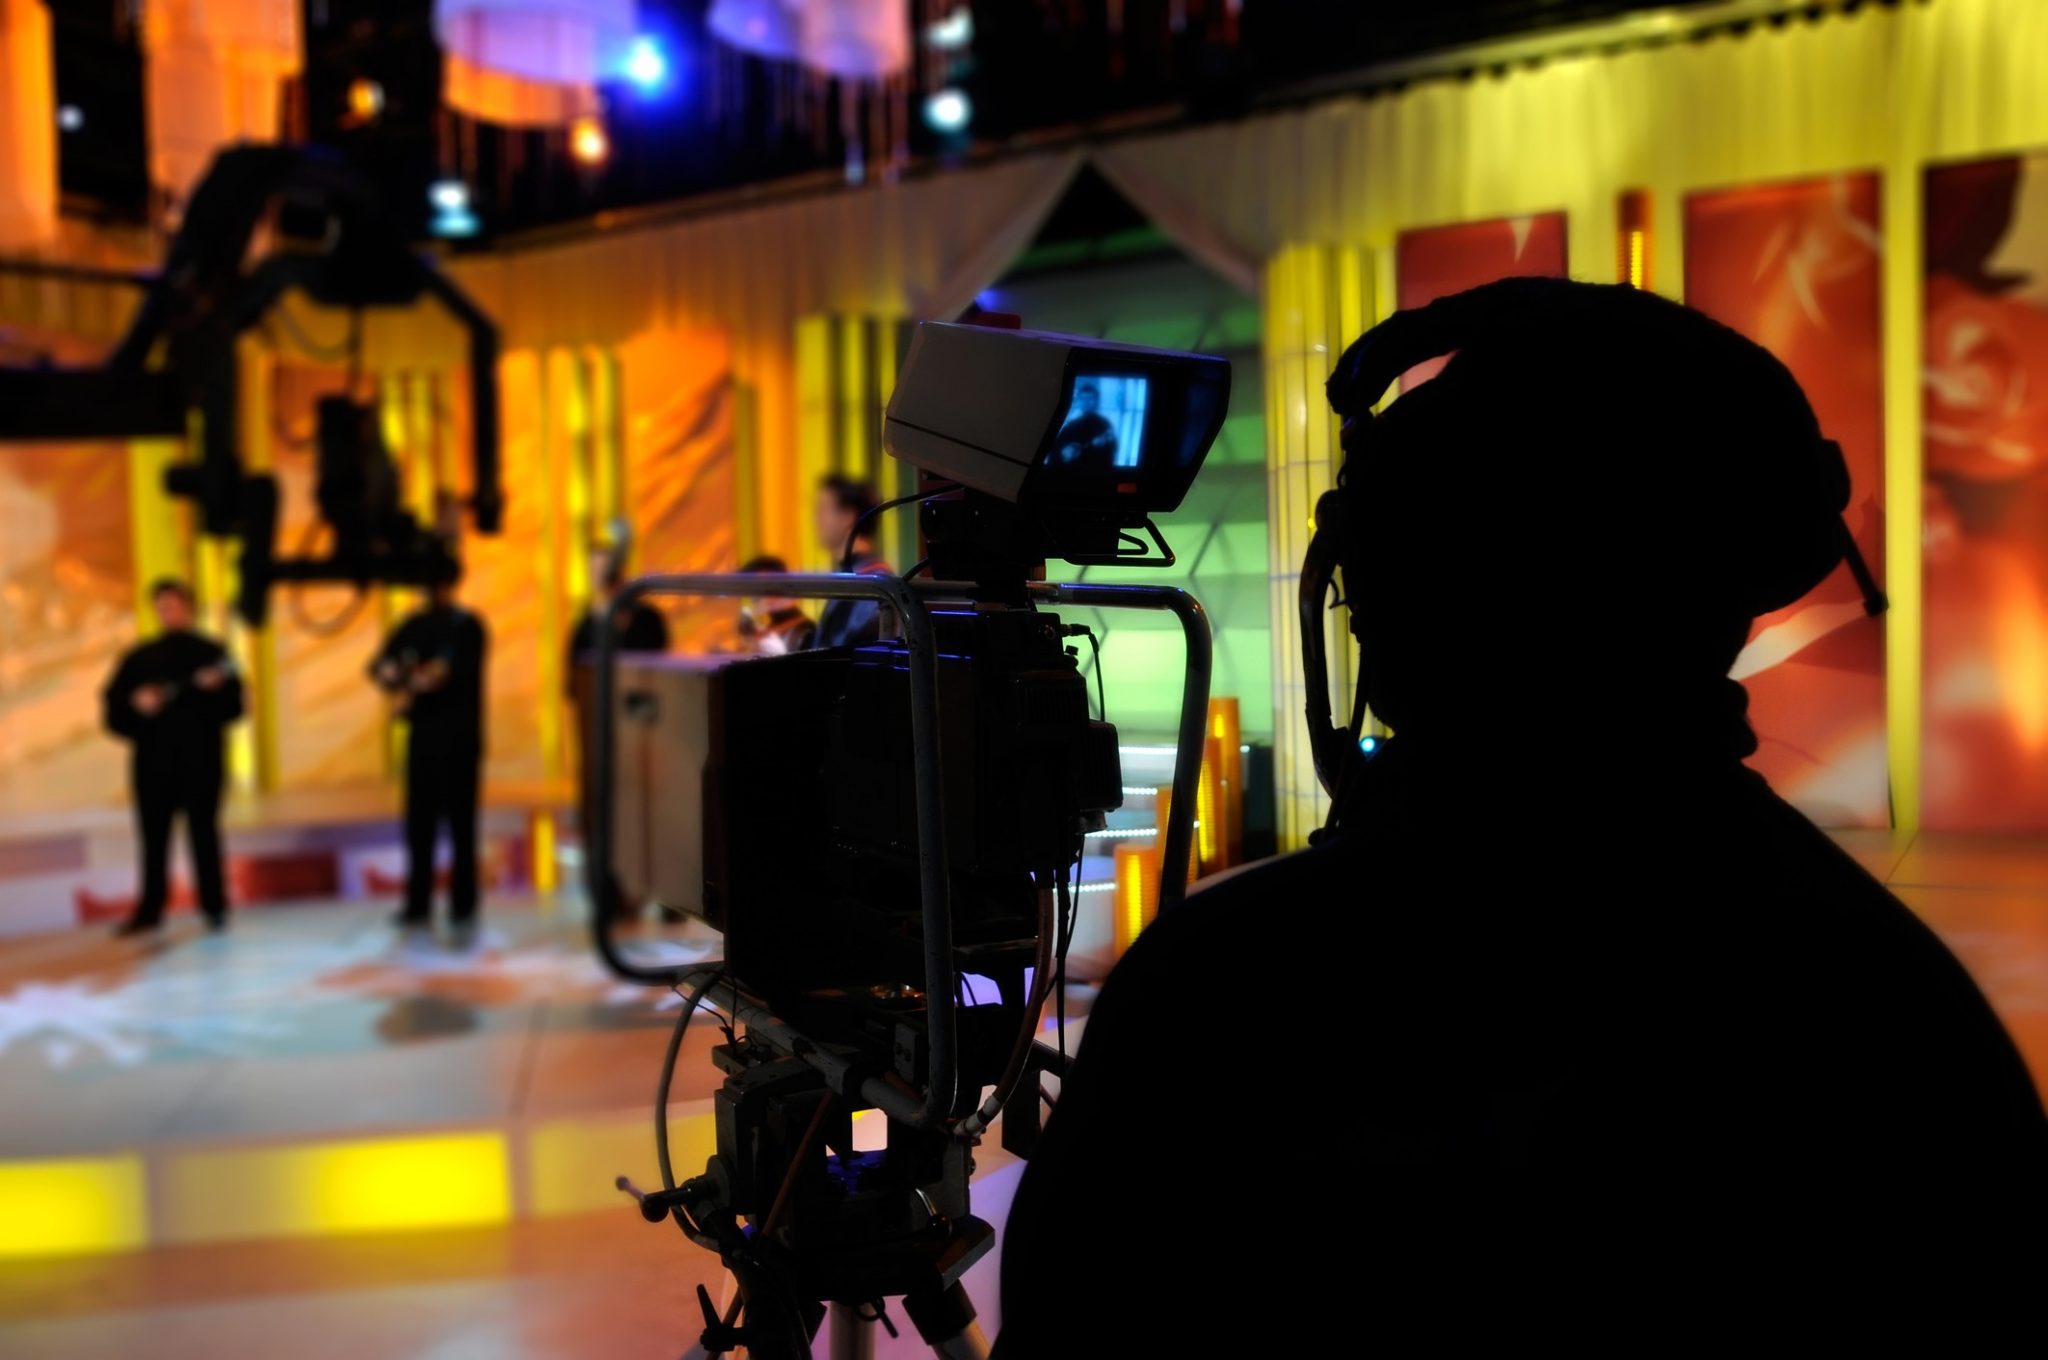 Make your career in Video Editing and Broadcasting